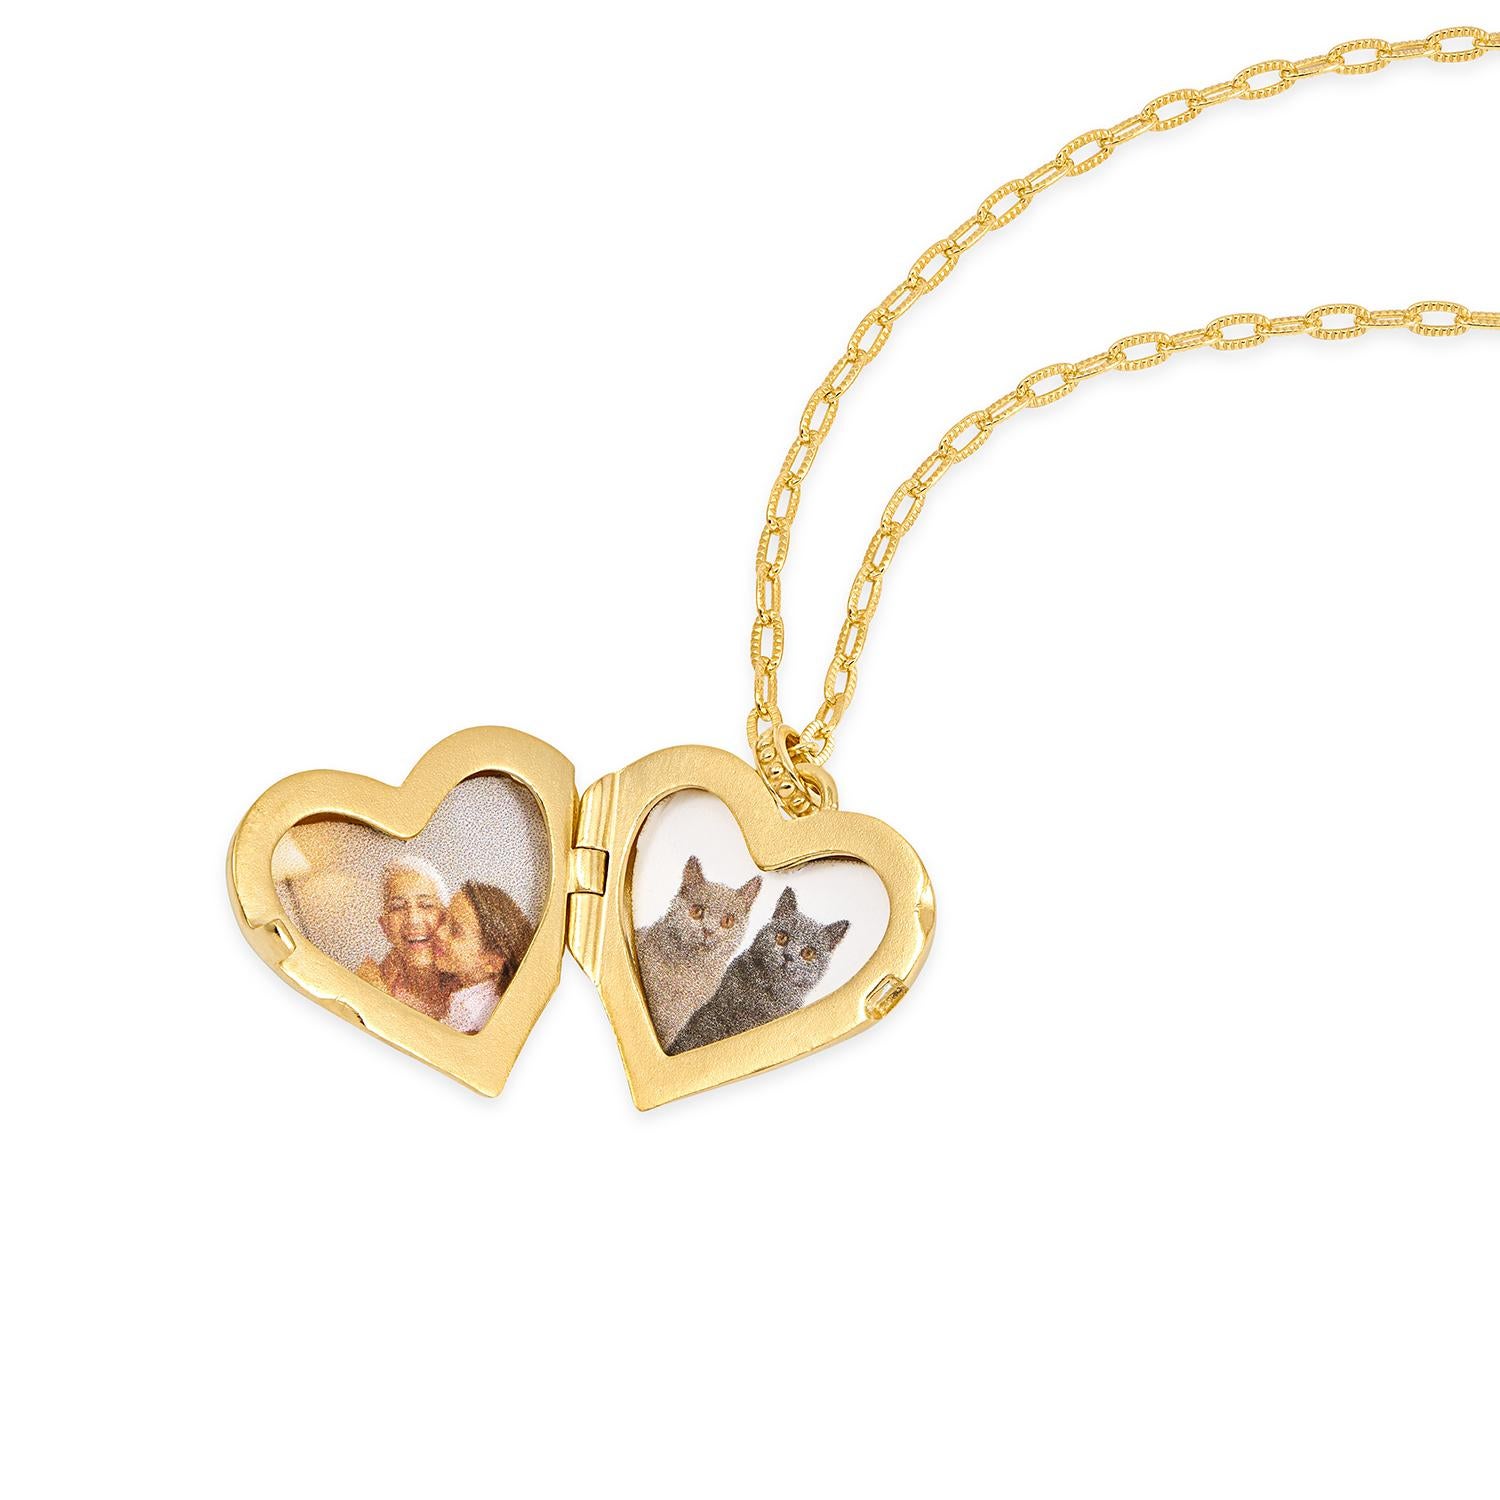 Celebrate your precious stories with our timeless, classic 'Treasured Heart' locket, suspended on our beautifully-textured, adjustable millie-grain chain and finished with our signature D&H lobster catch. The locket is handcrafted in sterling silver